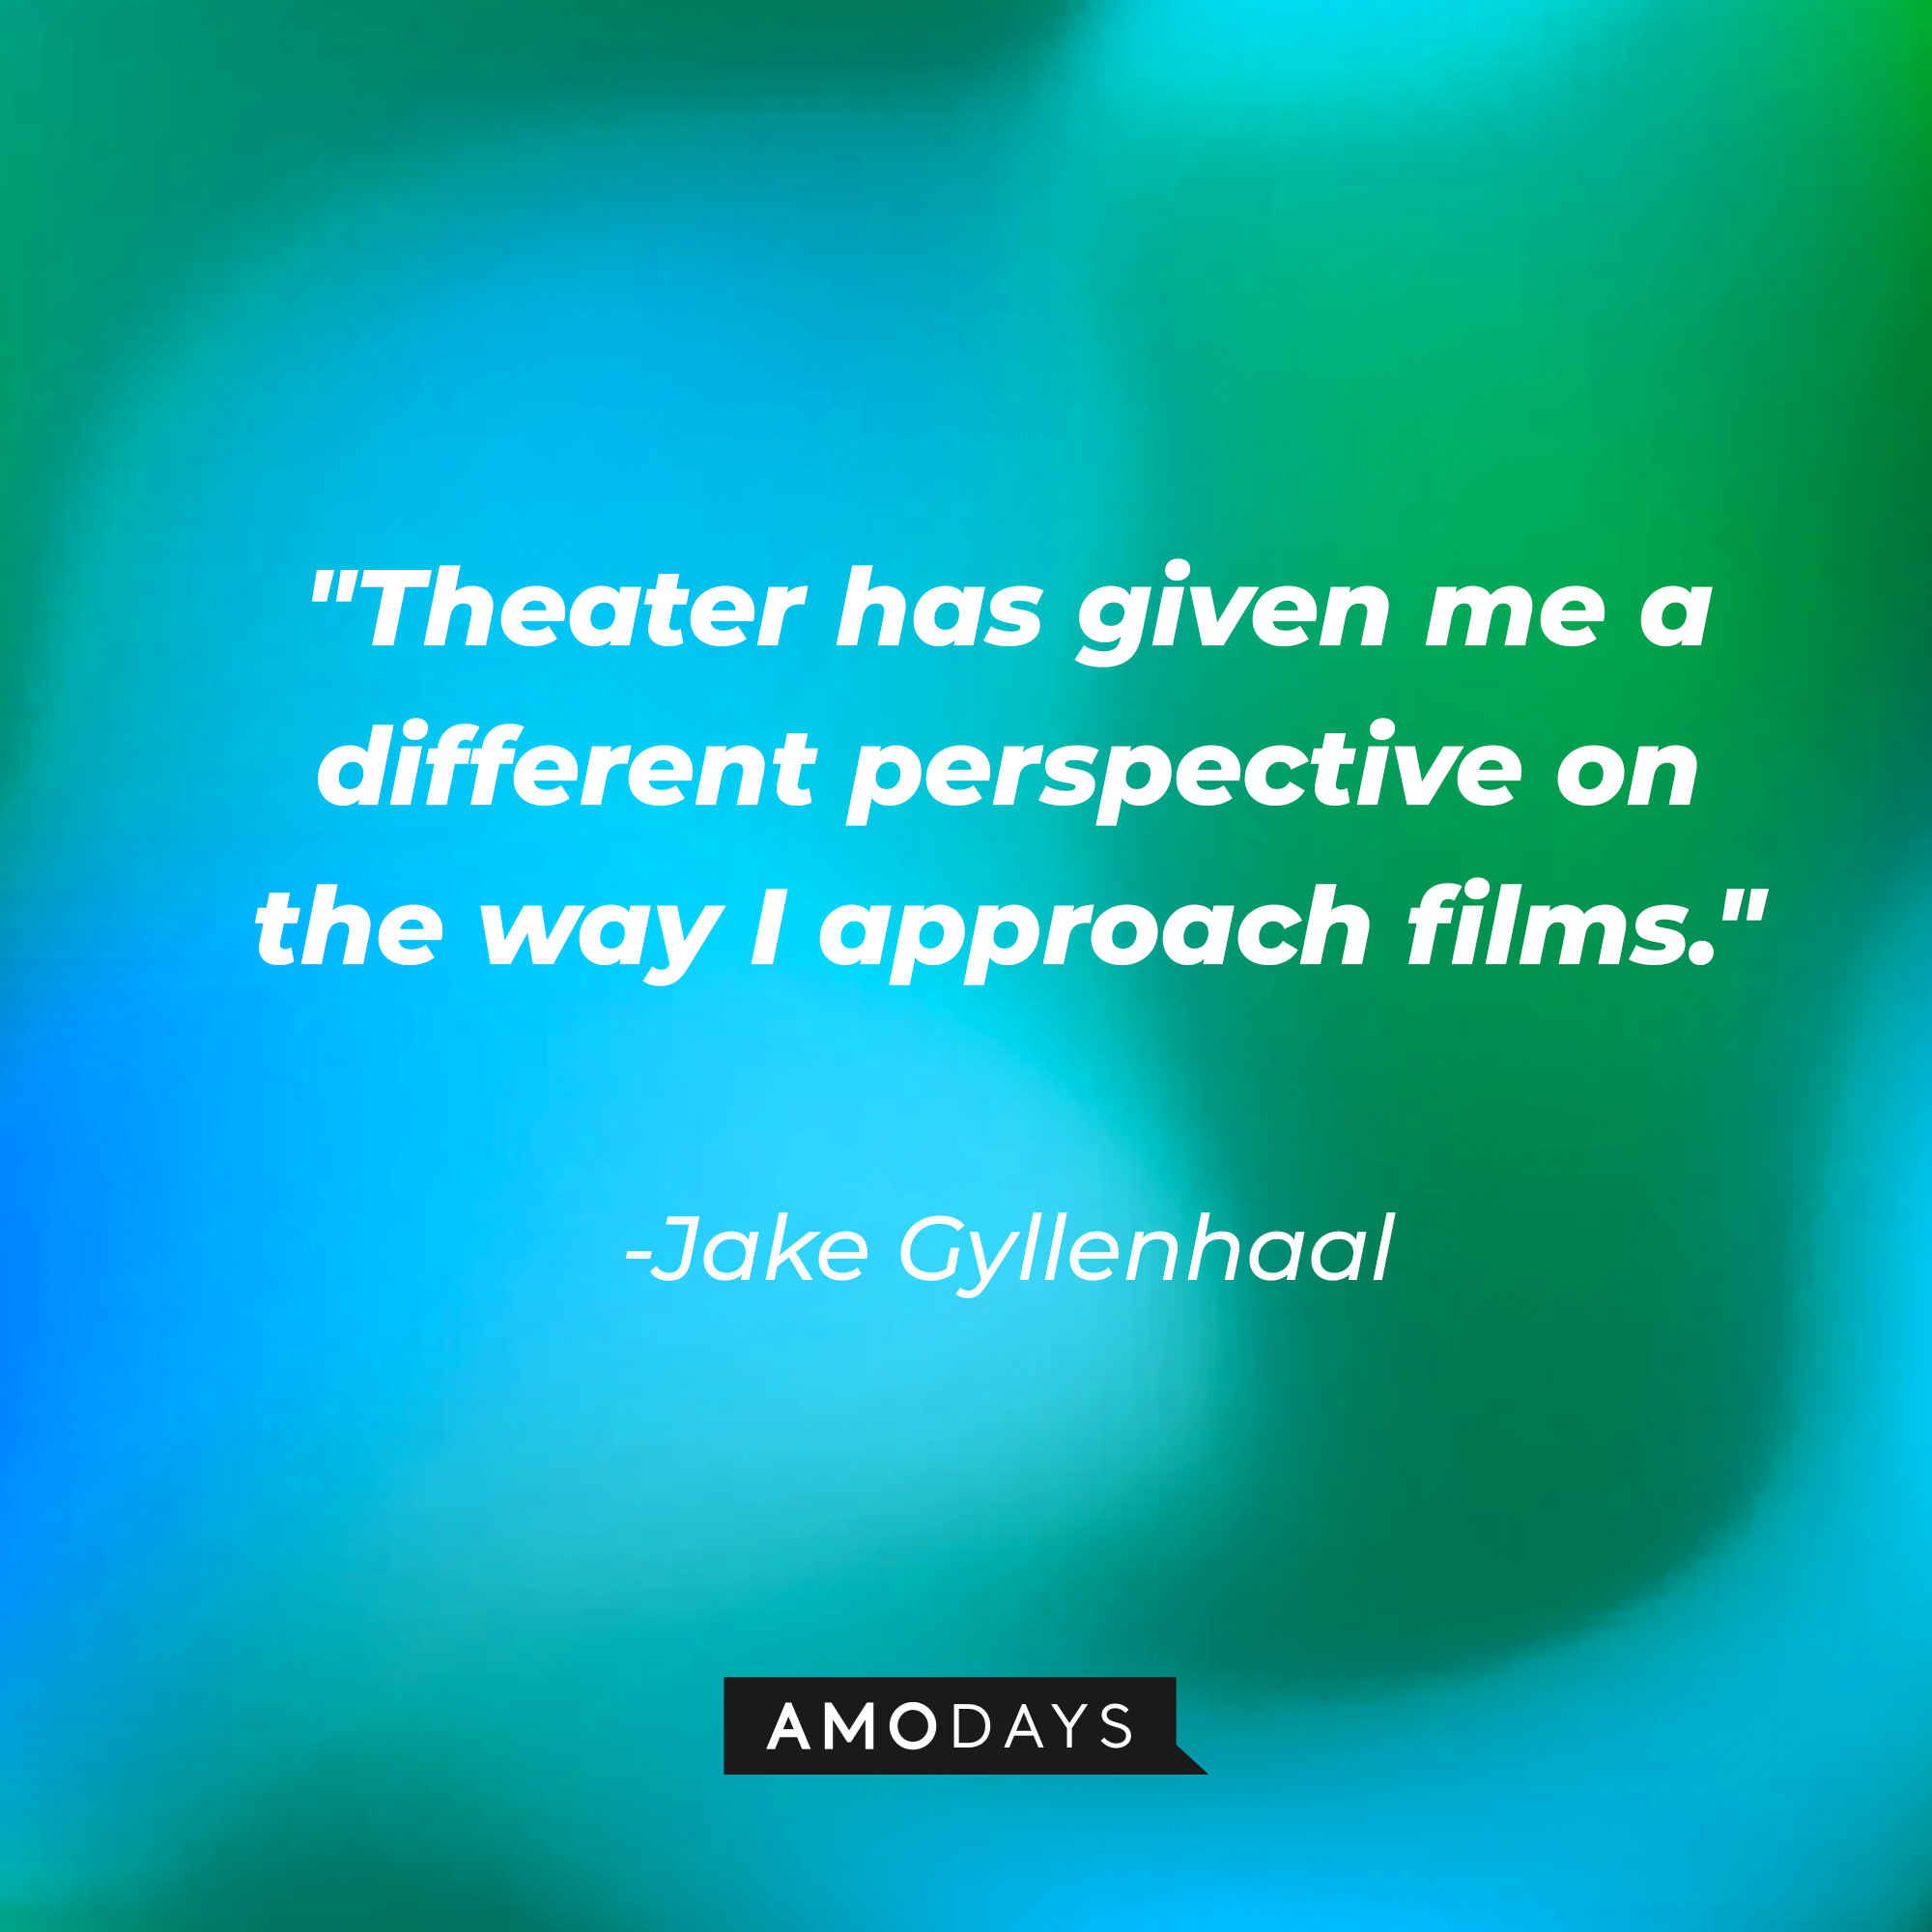 Jake Gyllenhaal's quote: "Theater has given me a different perspective on the way I approach films." | Source: AmoDays